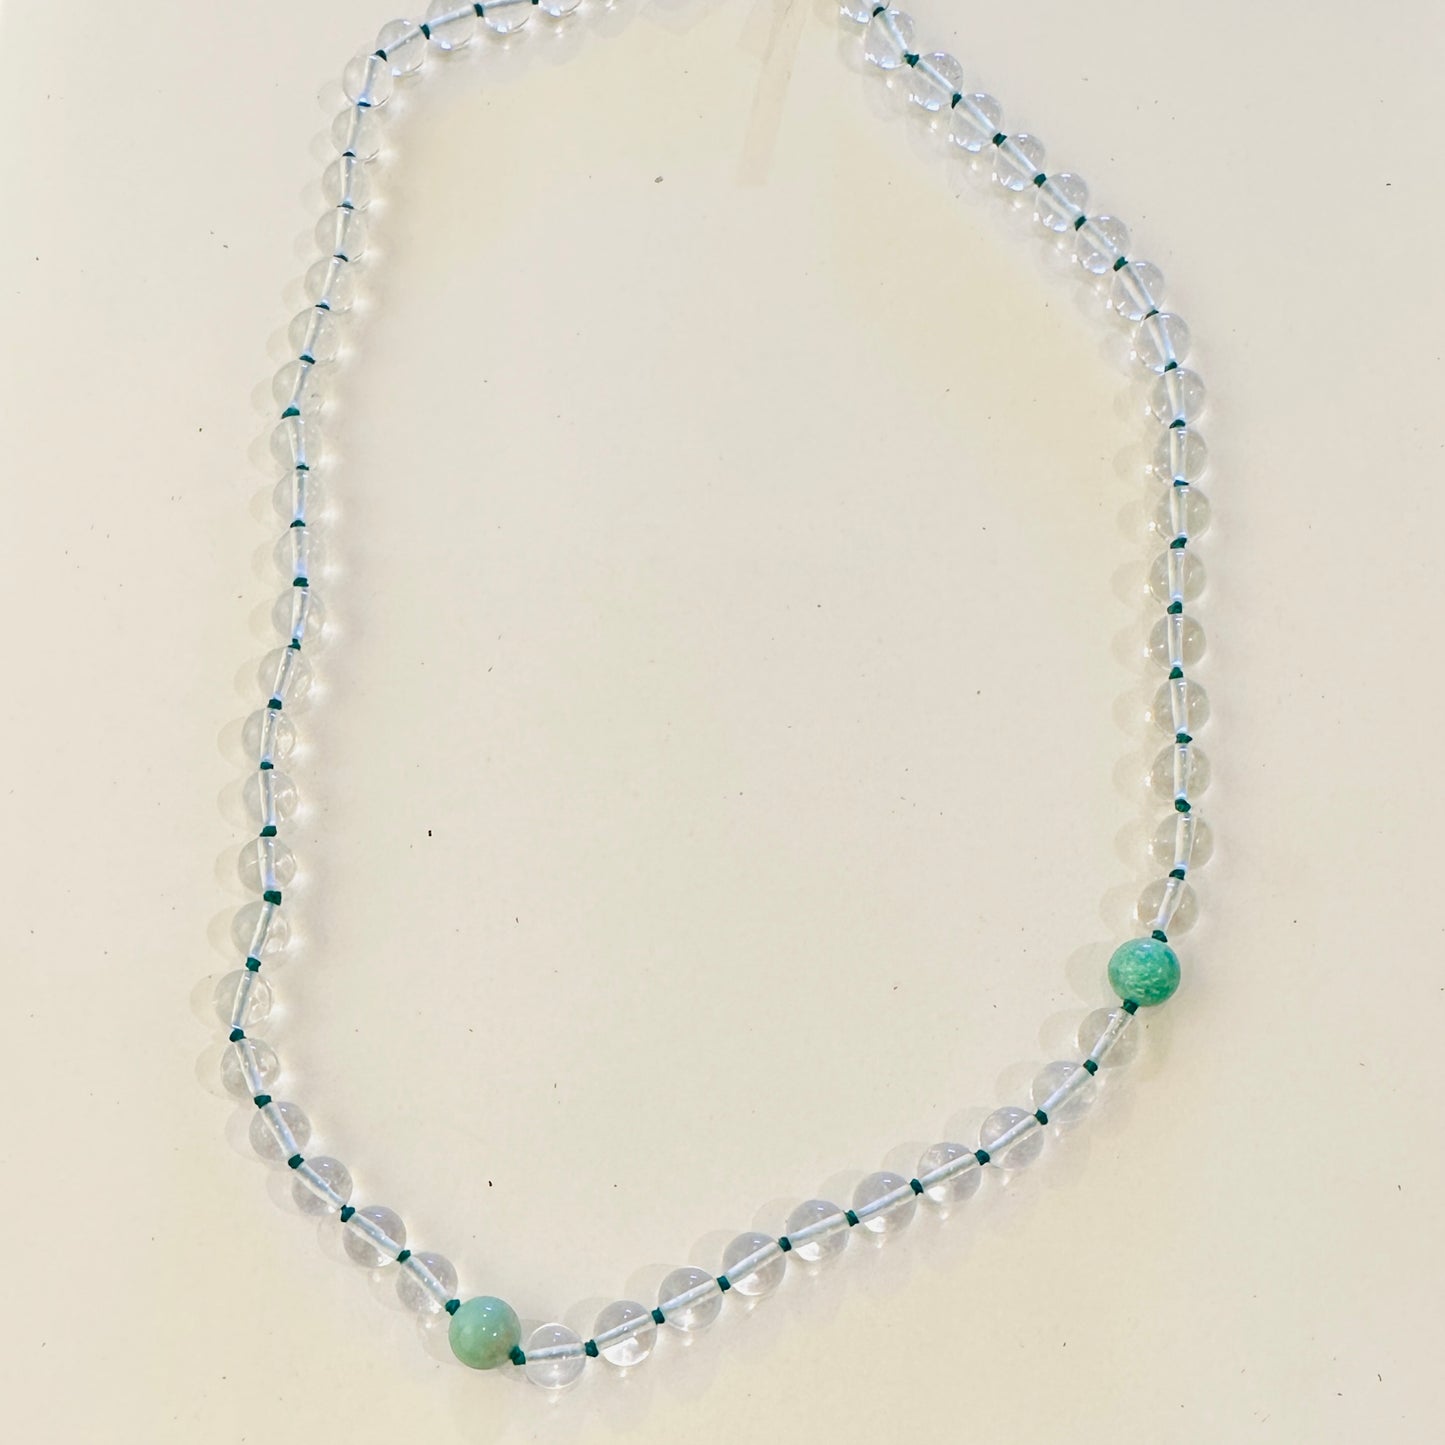 Gemstone Necklace With Rock Crystal & Green Variscite